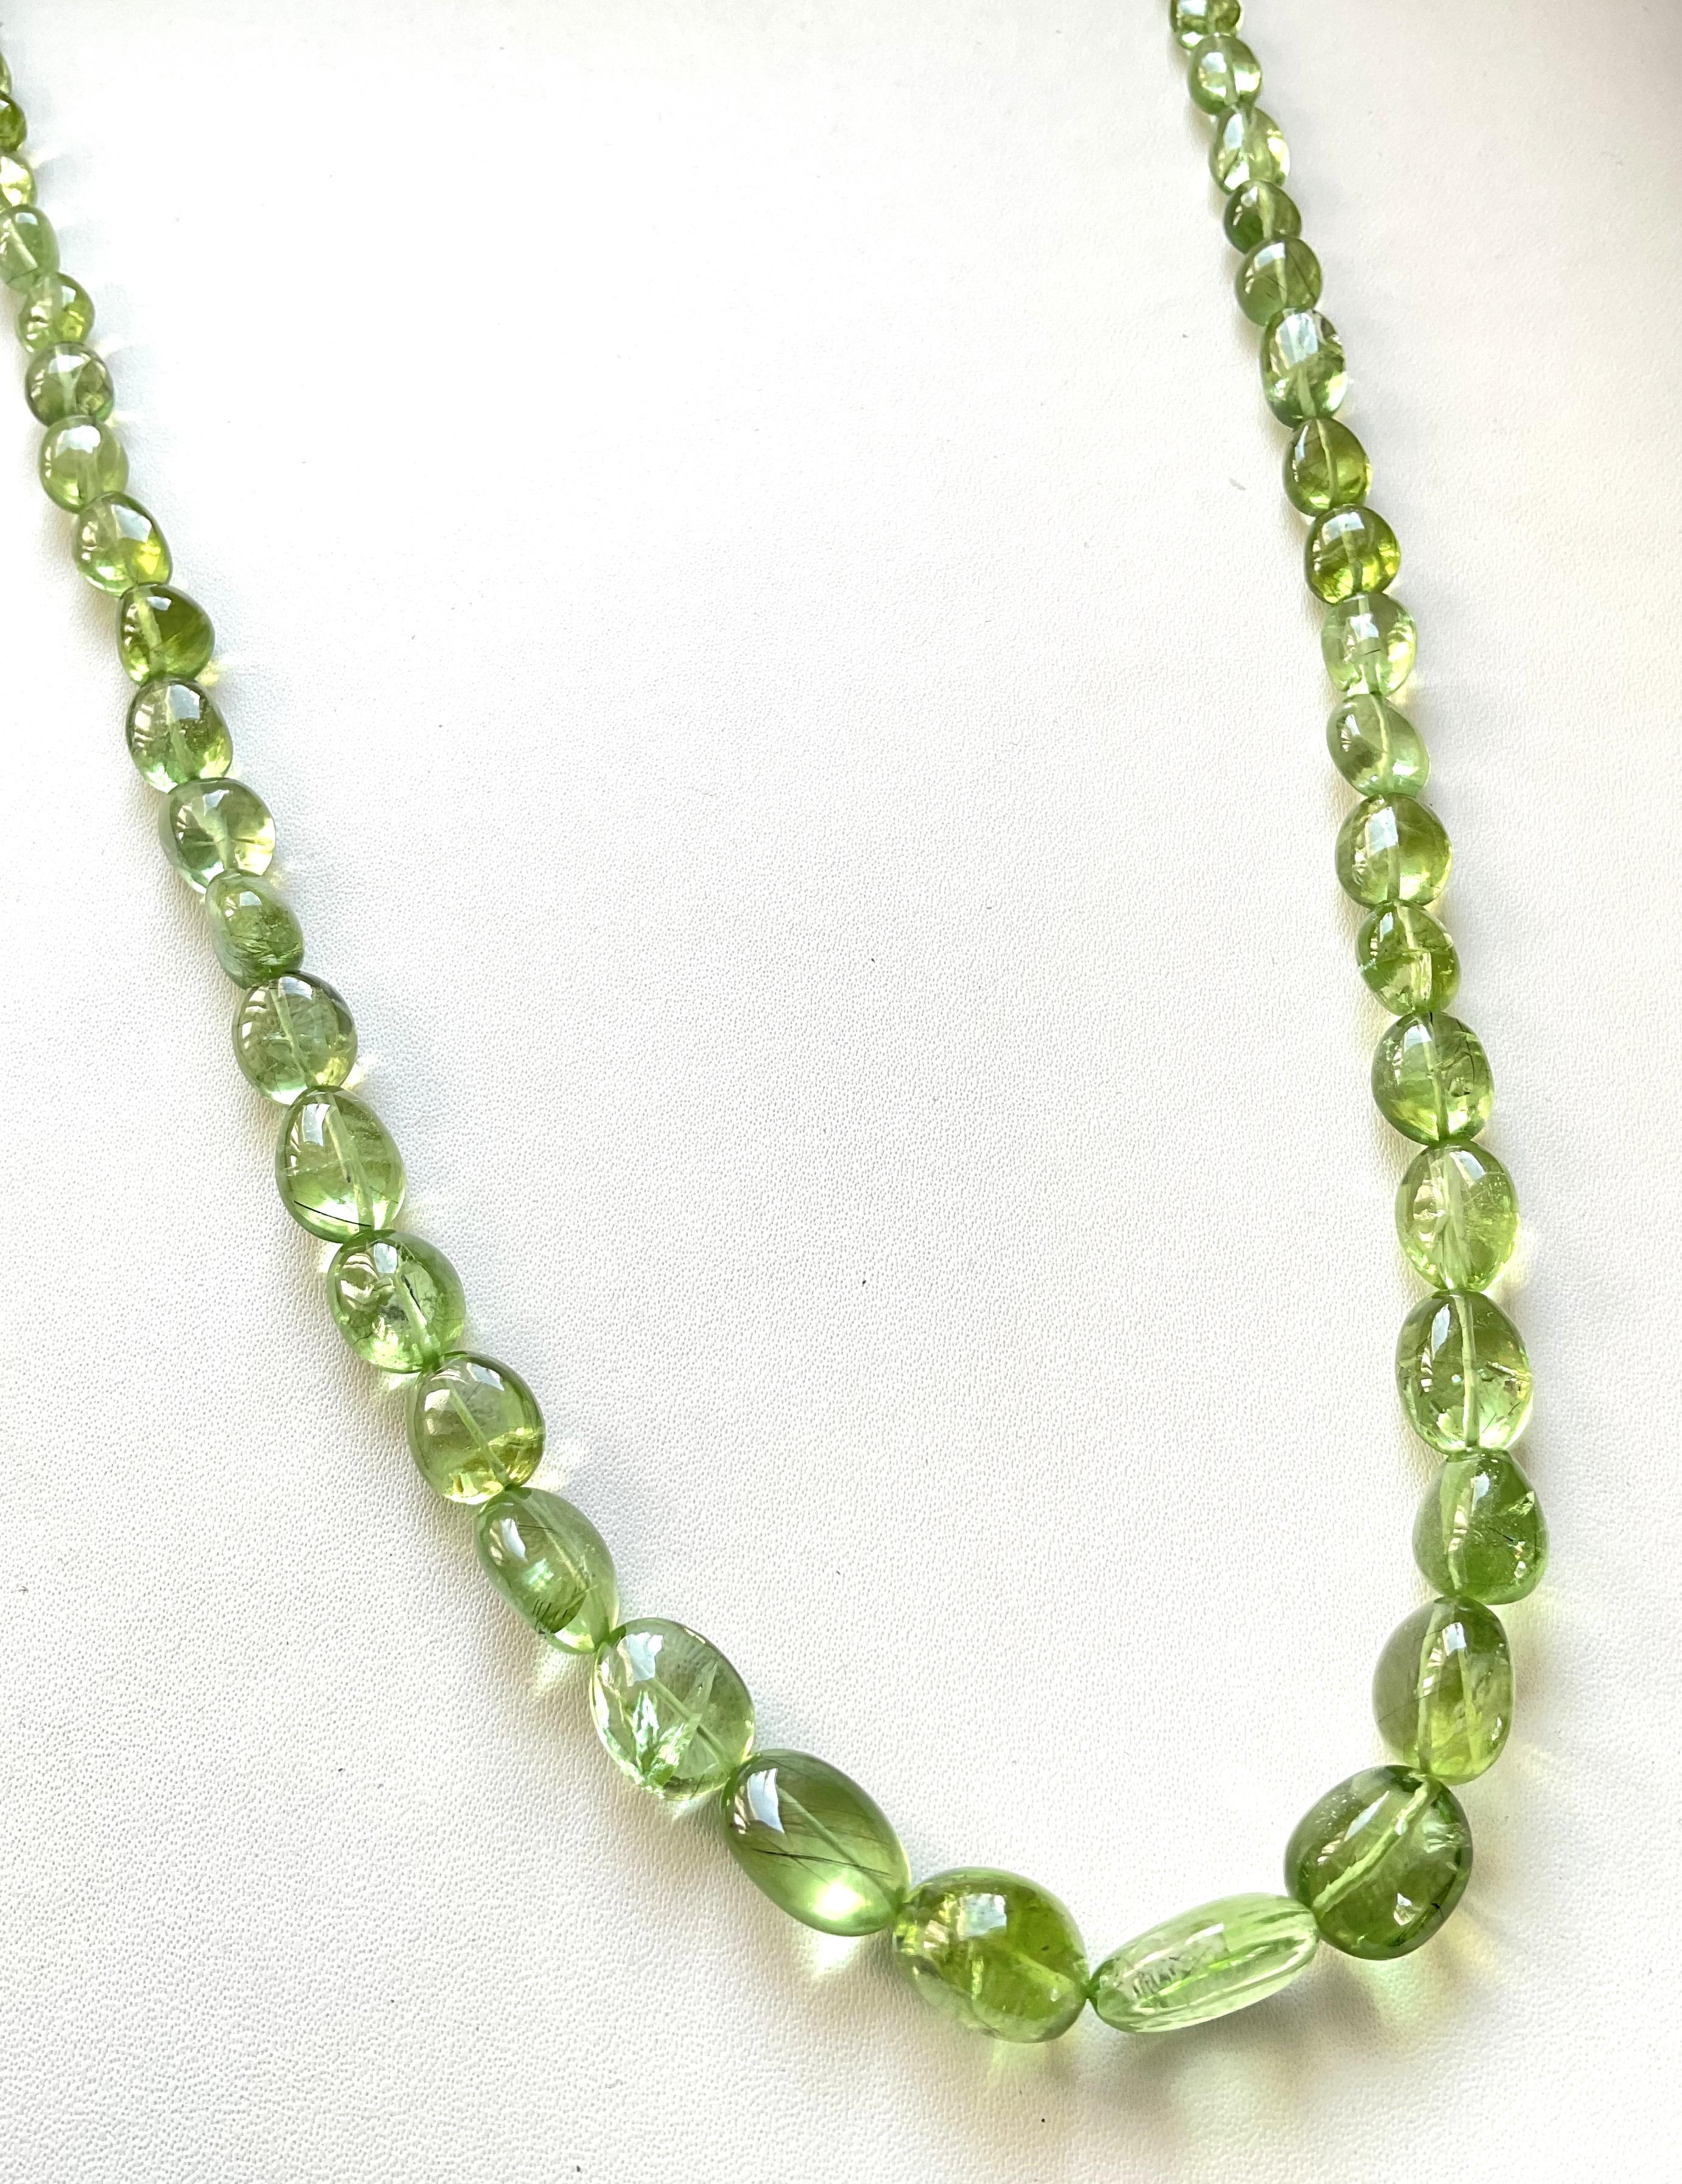 233.75 carats apple green peridot top quality plain tumbled natural necklace gem For Sale 2